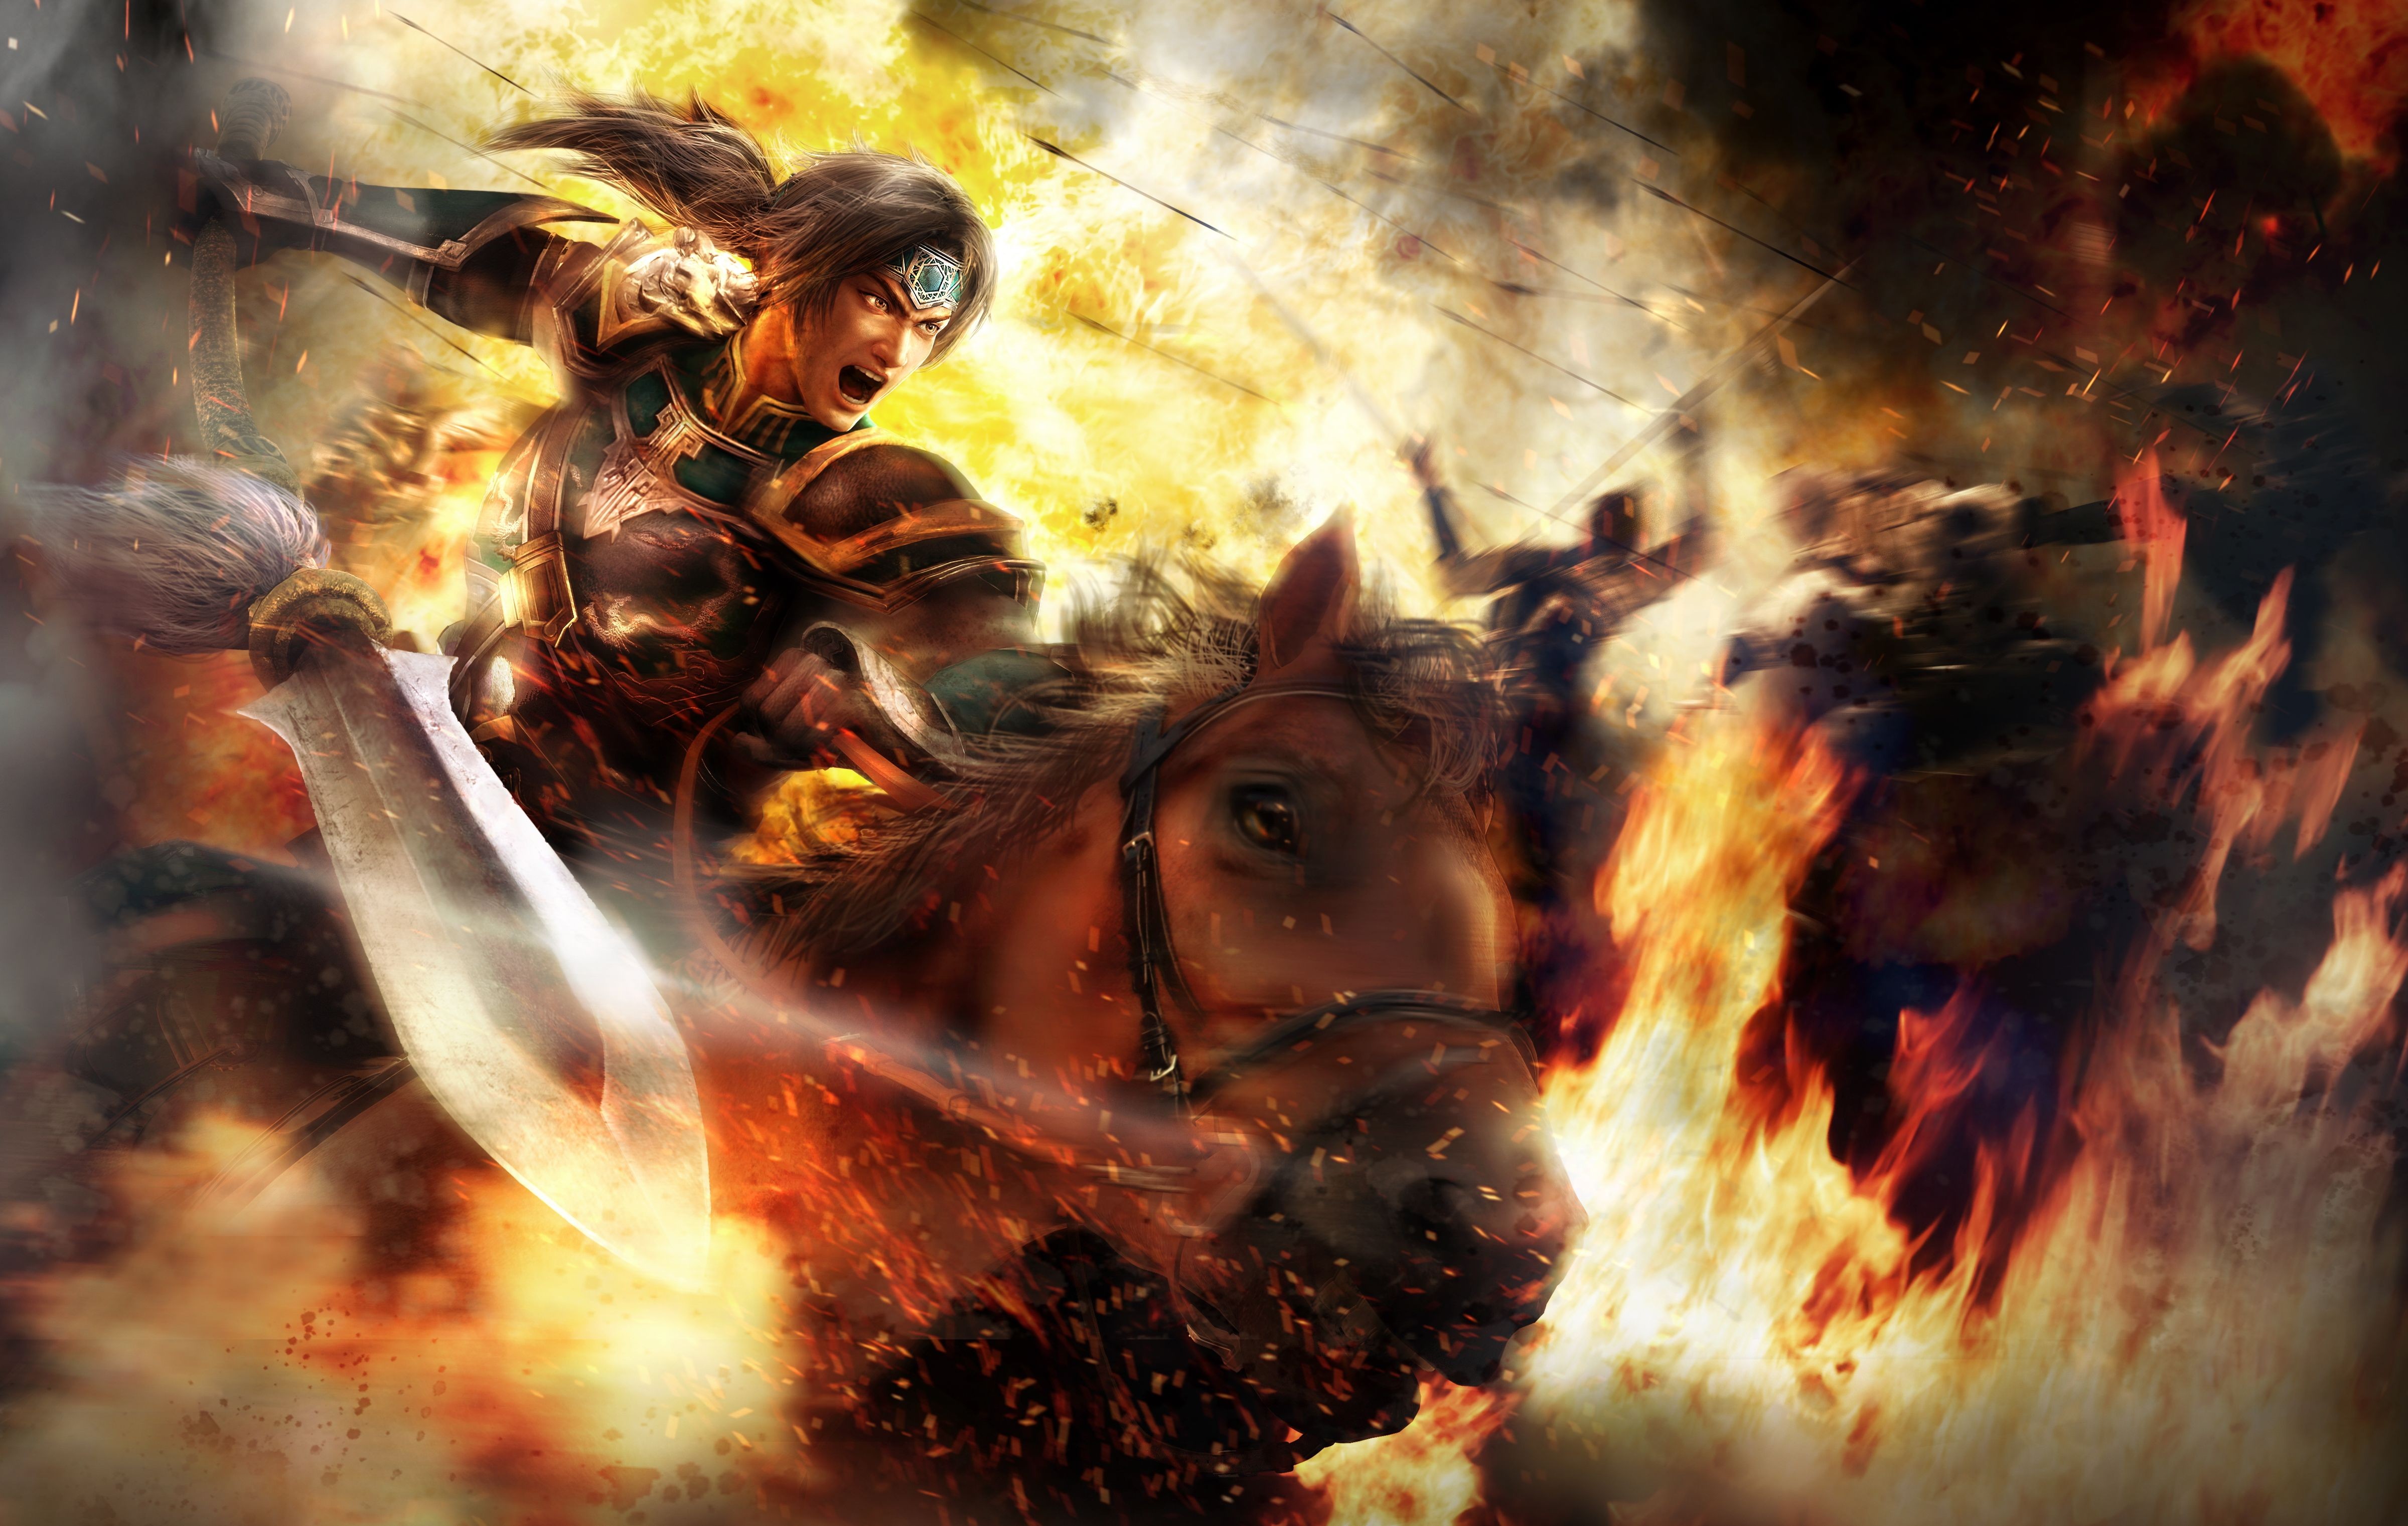 General 4800x3042 realistic Dynasty Warriors warrior horse video games weapon fire video game art sword